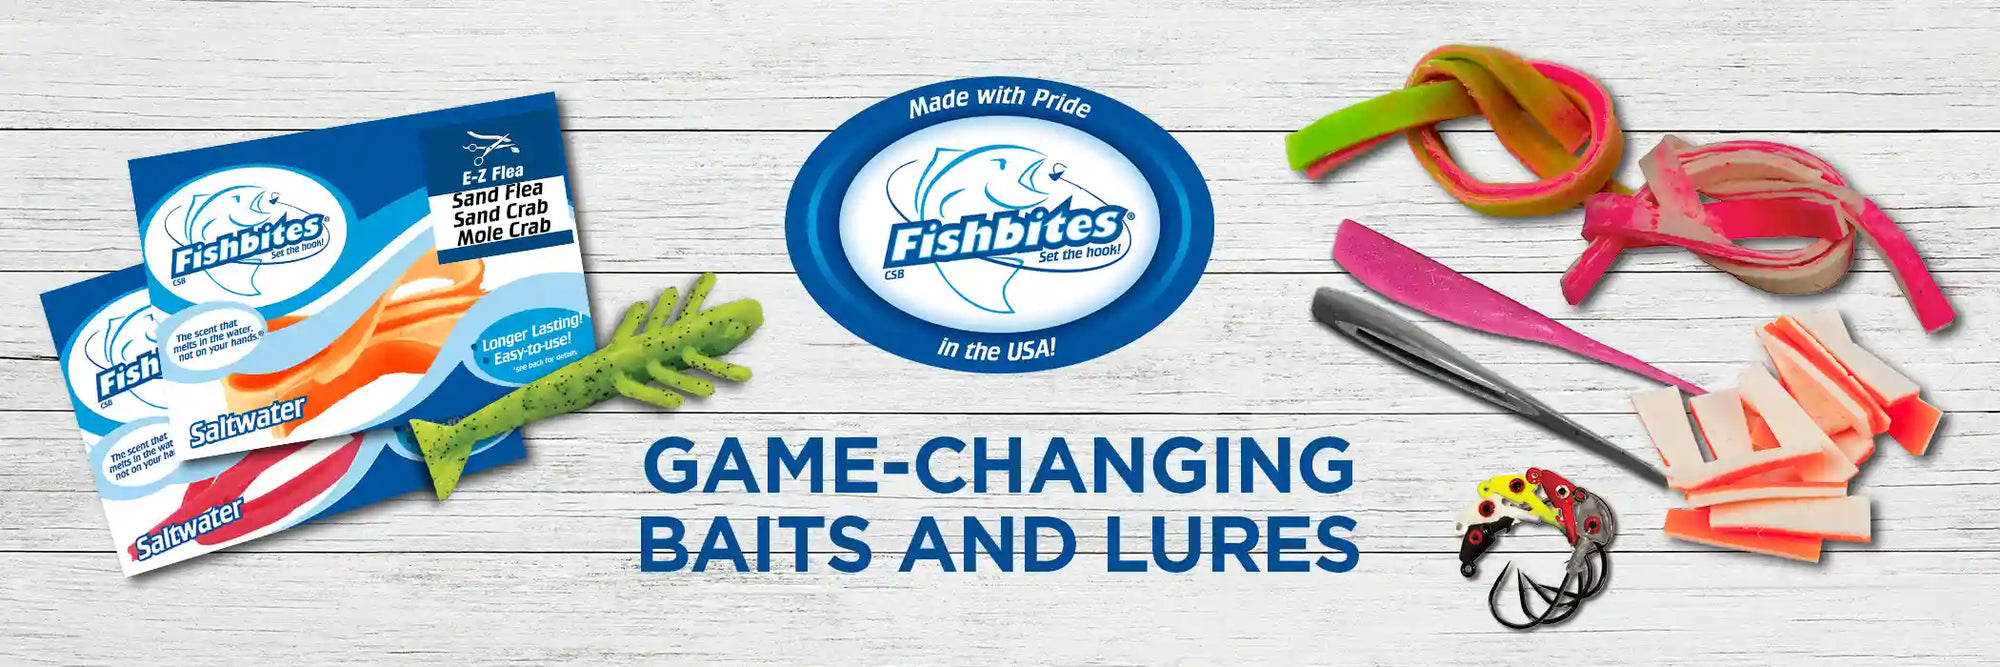 Fishbites Game-Changing Baits and Lures